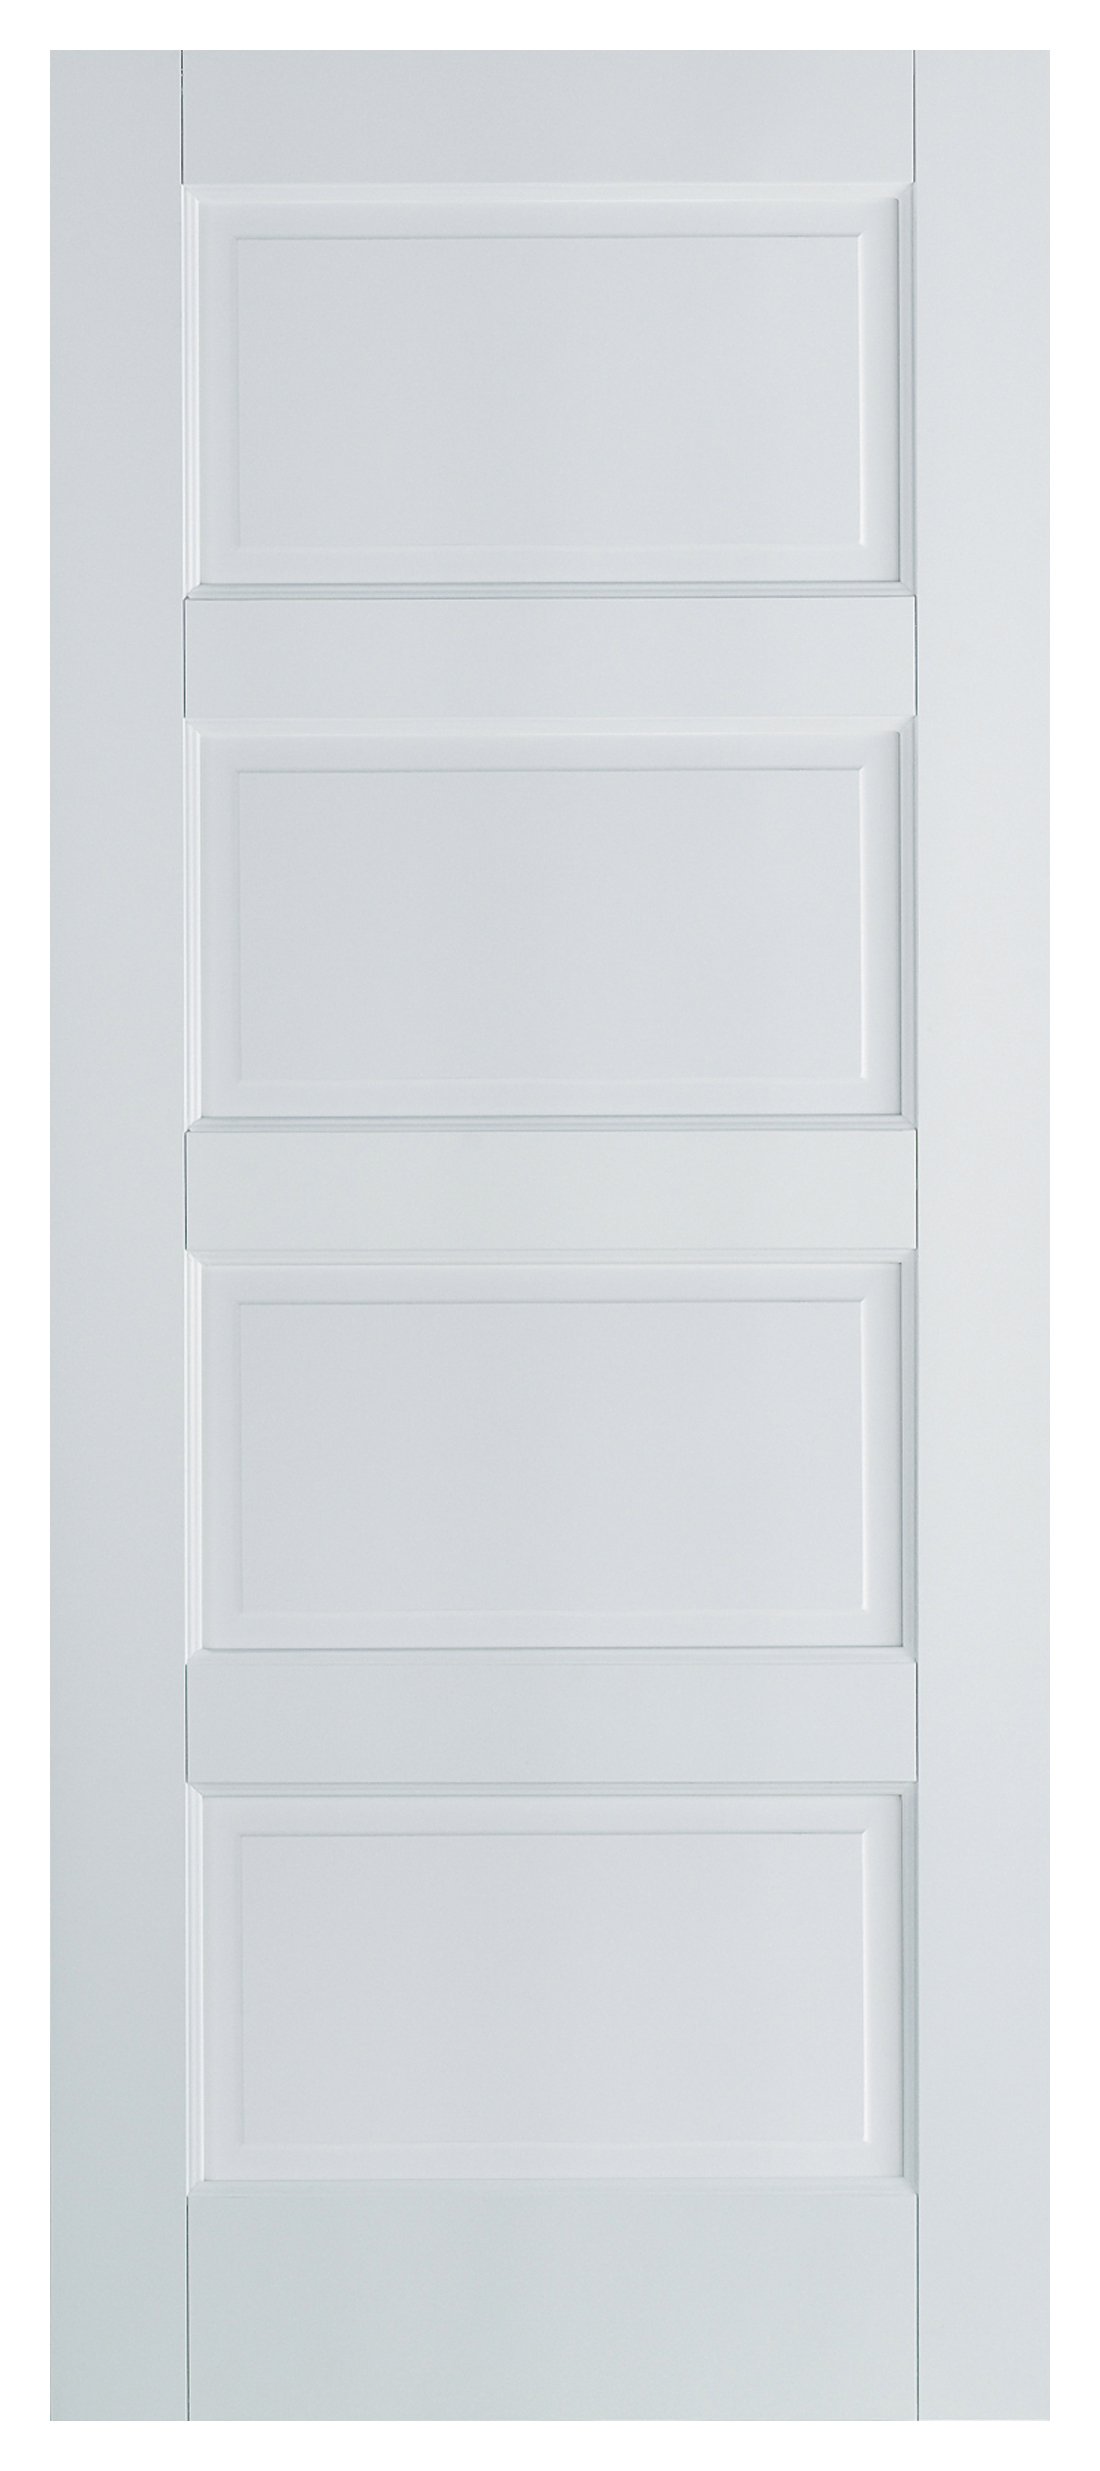 Image of LPD Internal Contemporary 4 Panel Primed White Solid Core Door - 838 x 1981mm